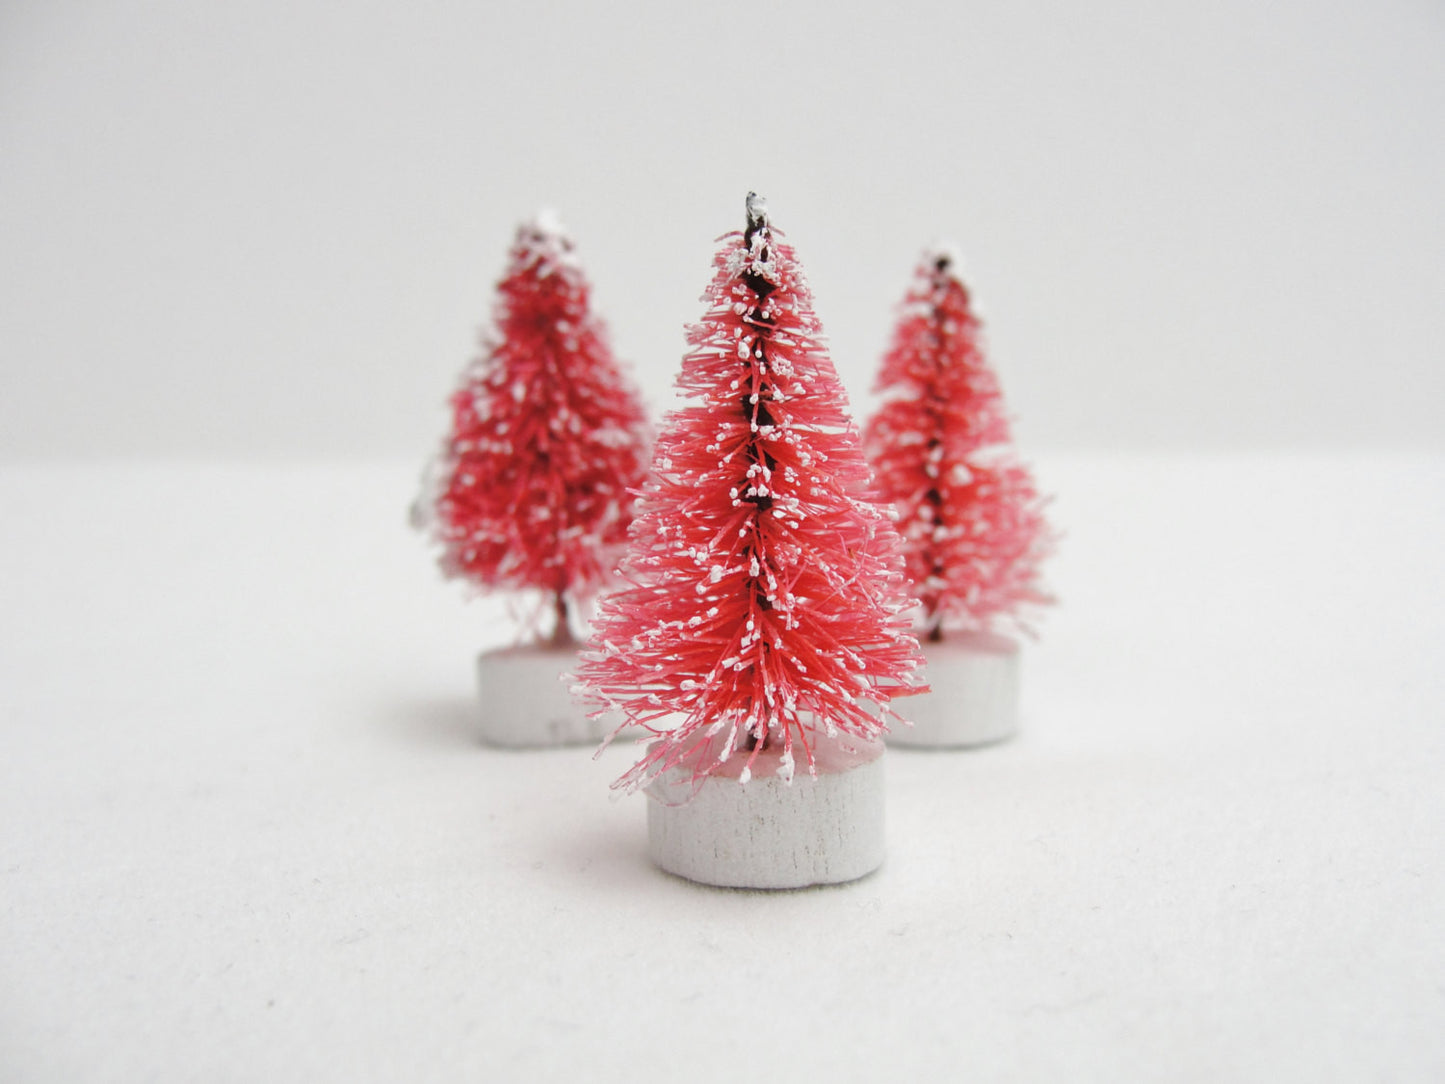 Frosted Pink bottle brush sisal trees 1.25" tall set of 3 - General Crafts - Craft Supply House